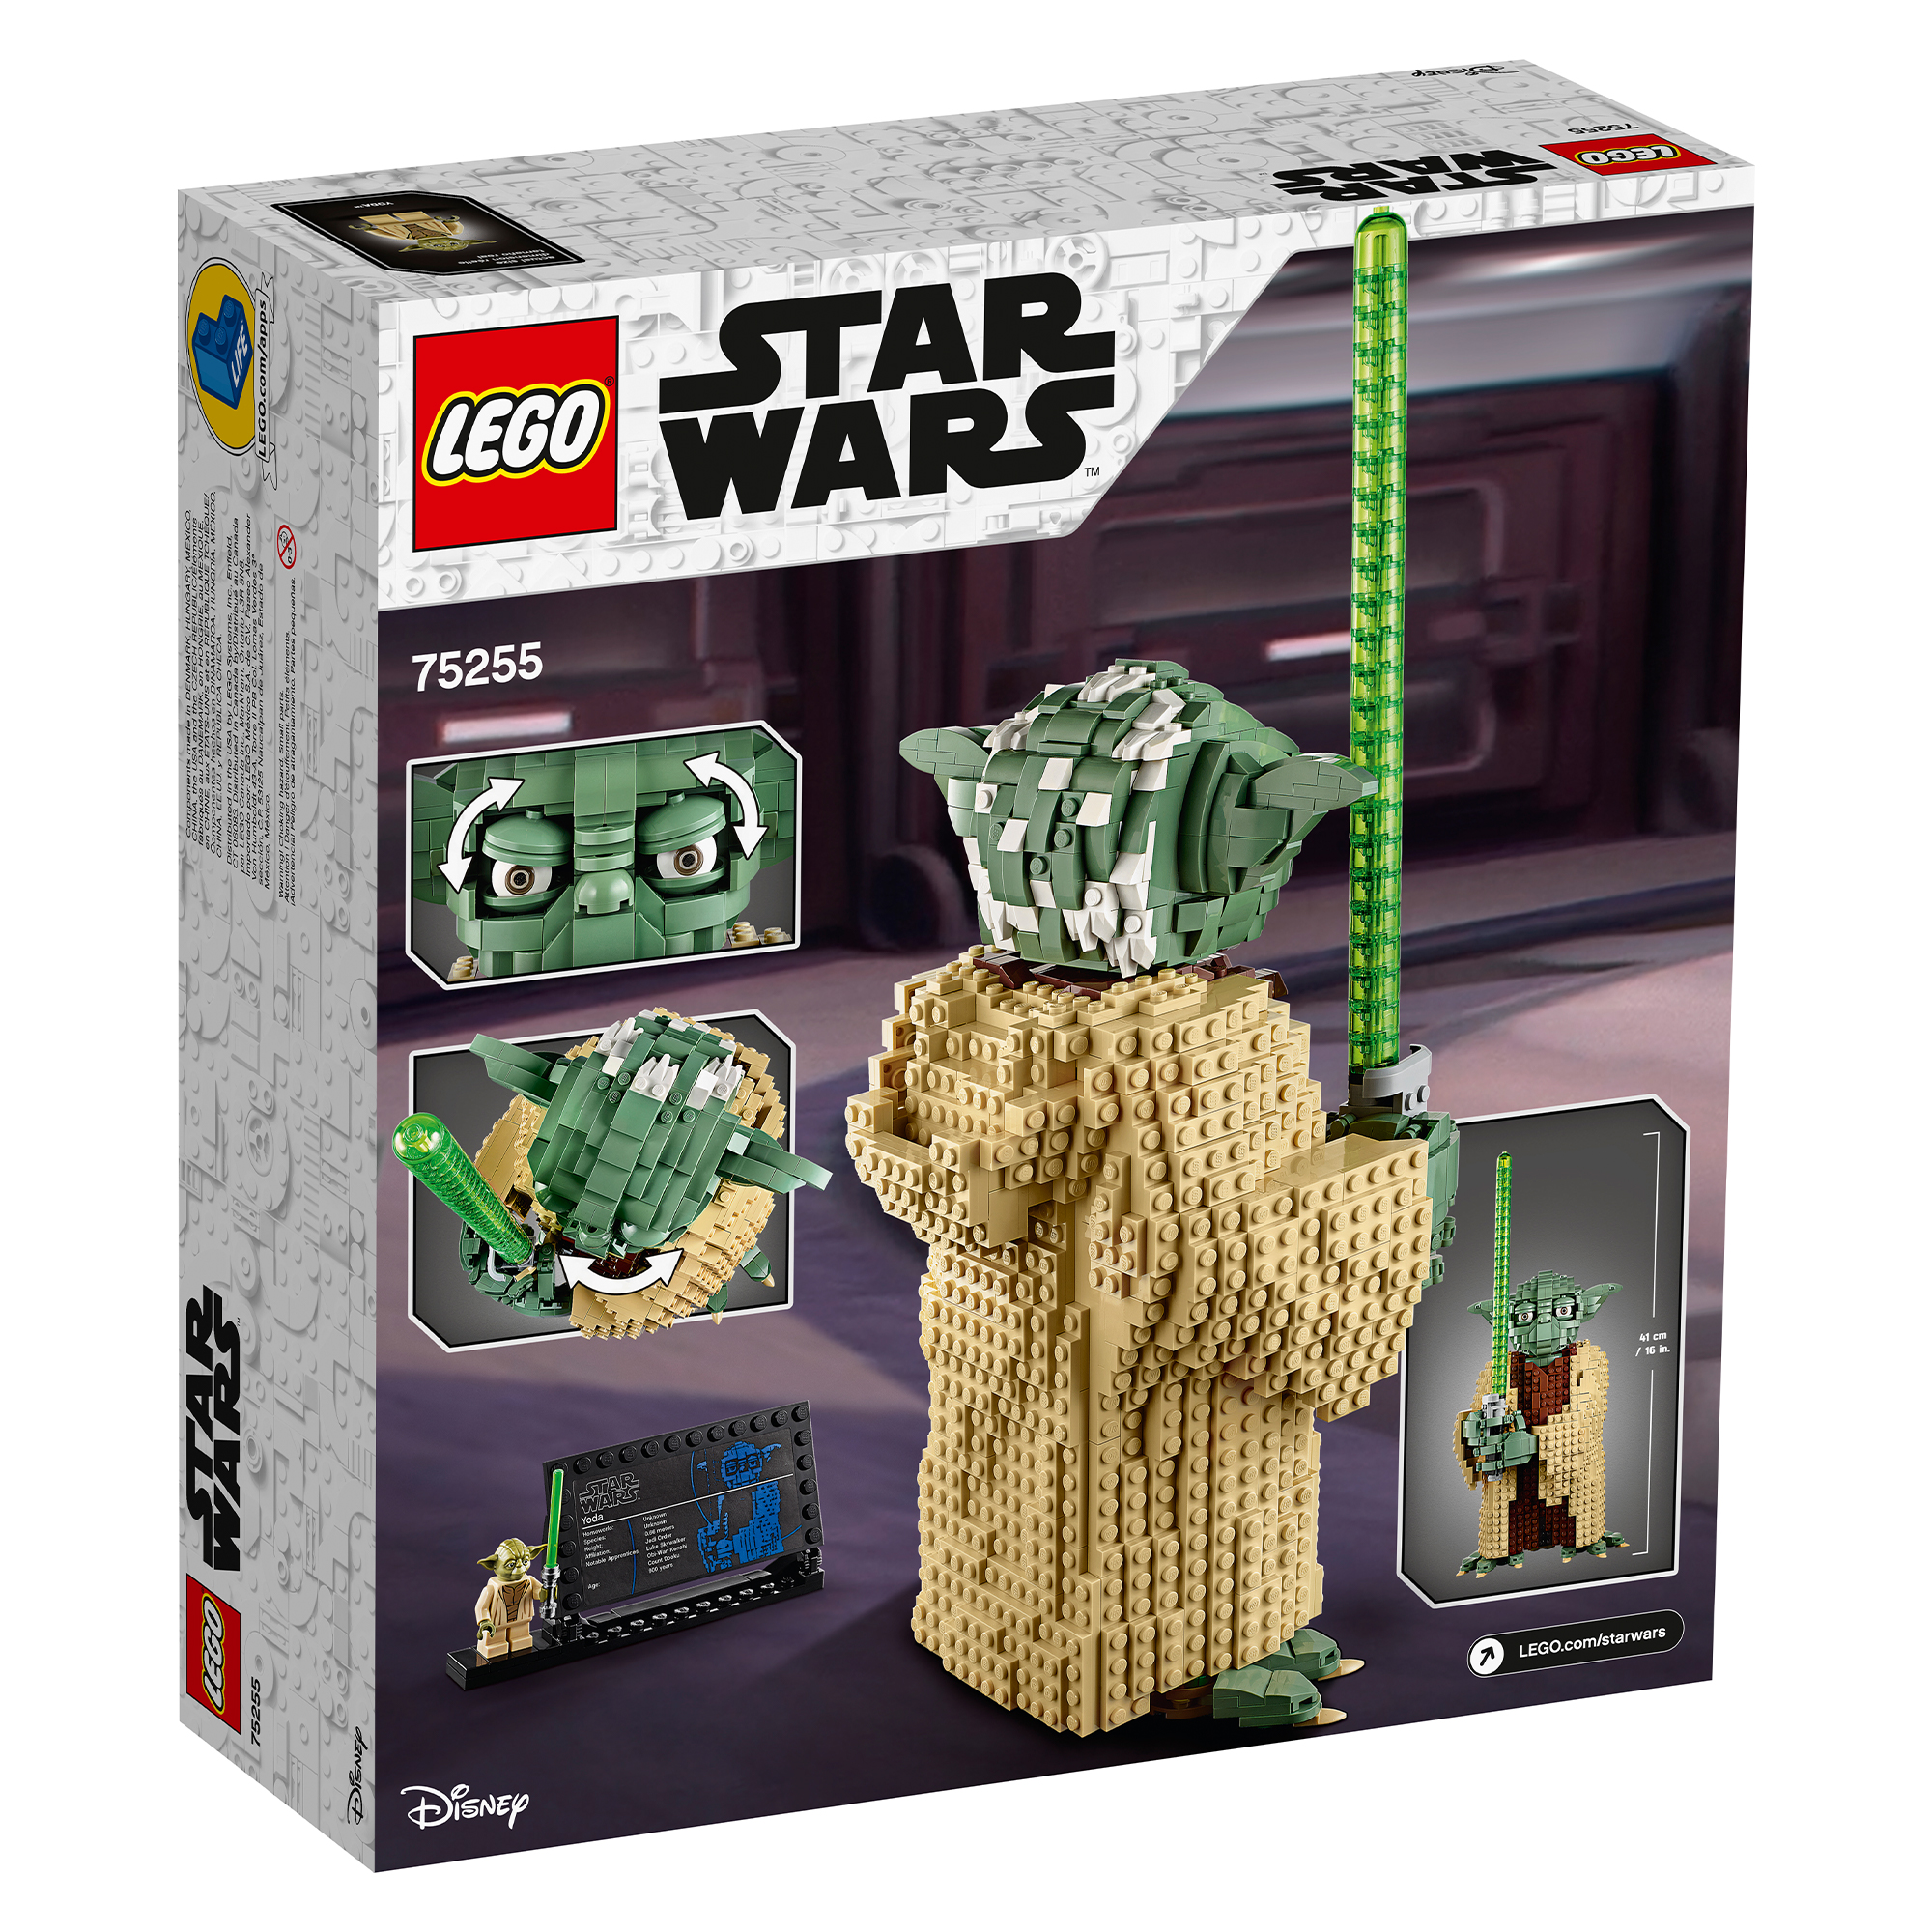 LEGO Star Wars: Attack of the Clones Yoda 75255 Building Toy Set (1,771 Pieces) - image 4 of 10